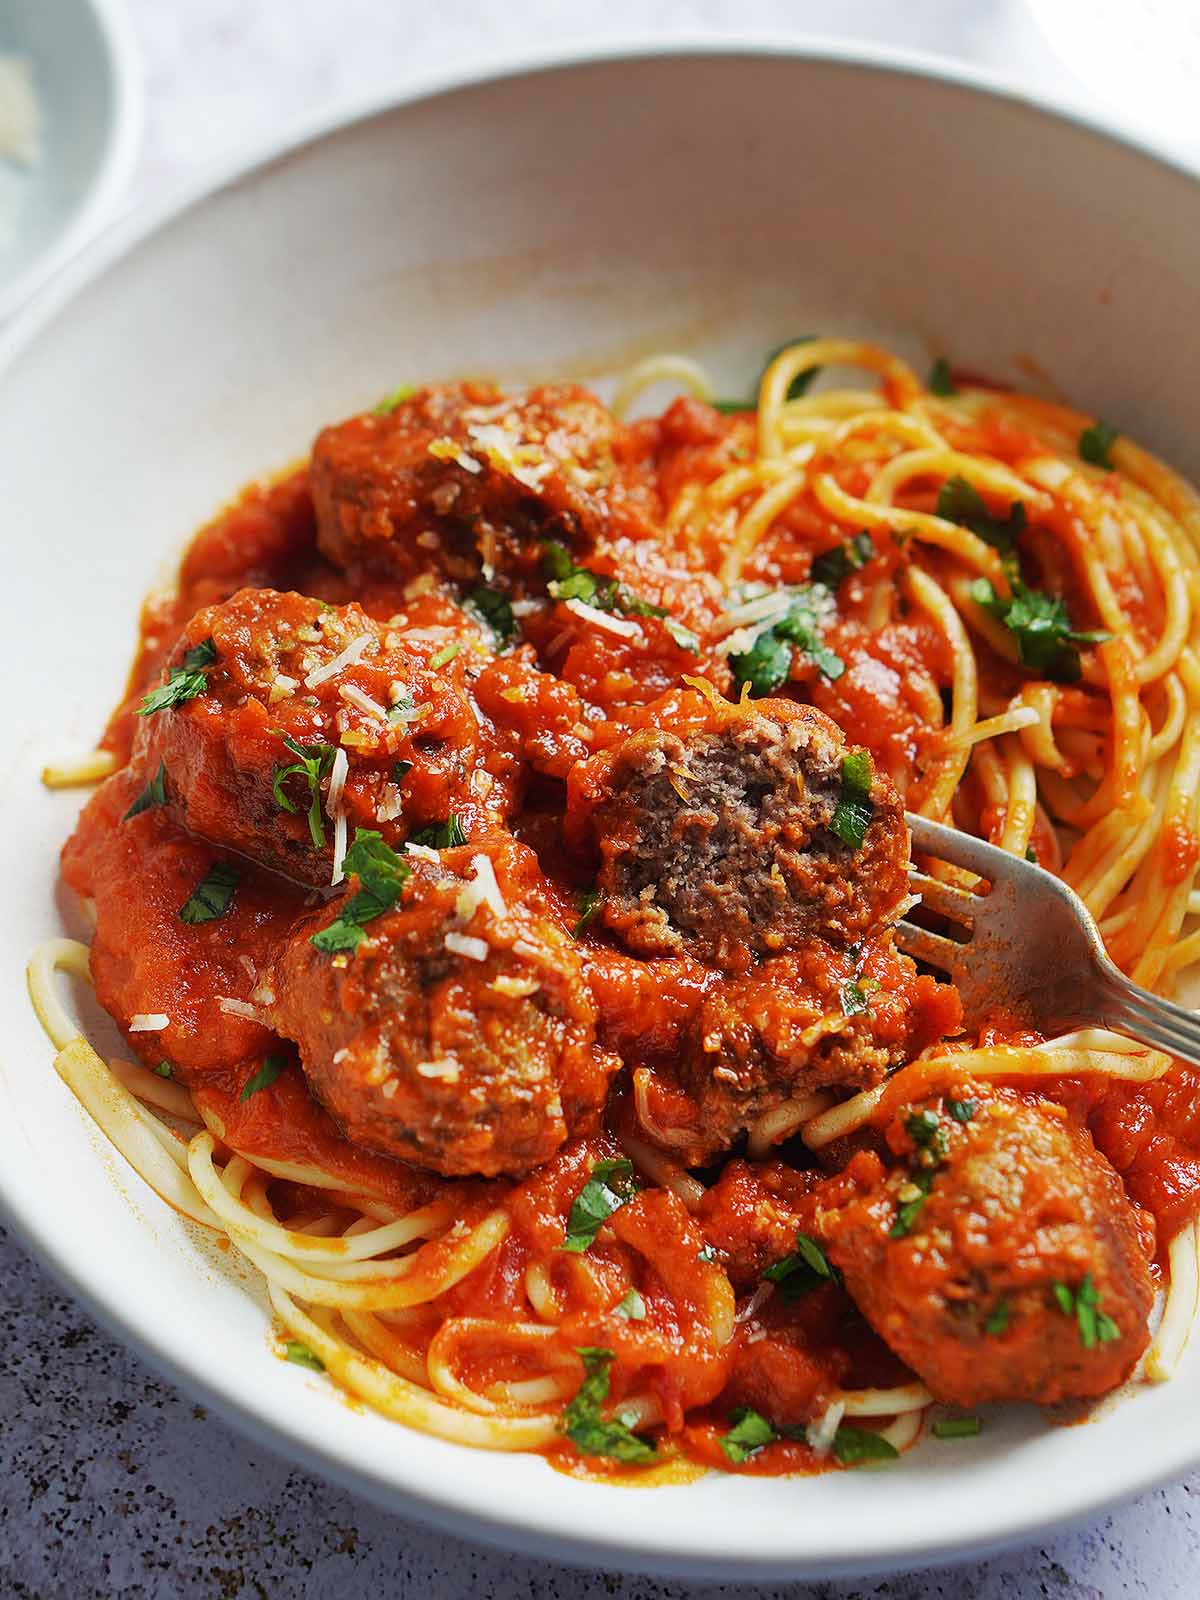 An bowl with meatballs over spaghetti and sauce.